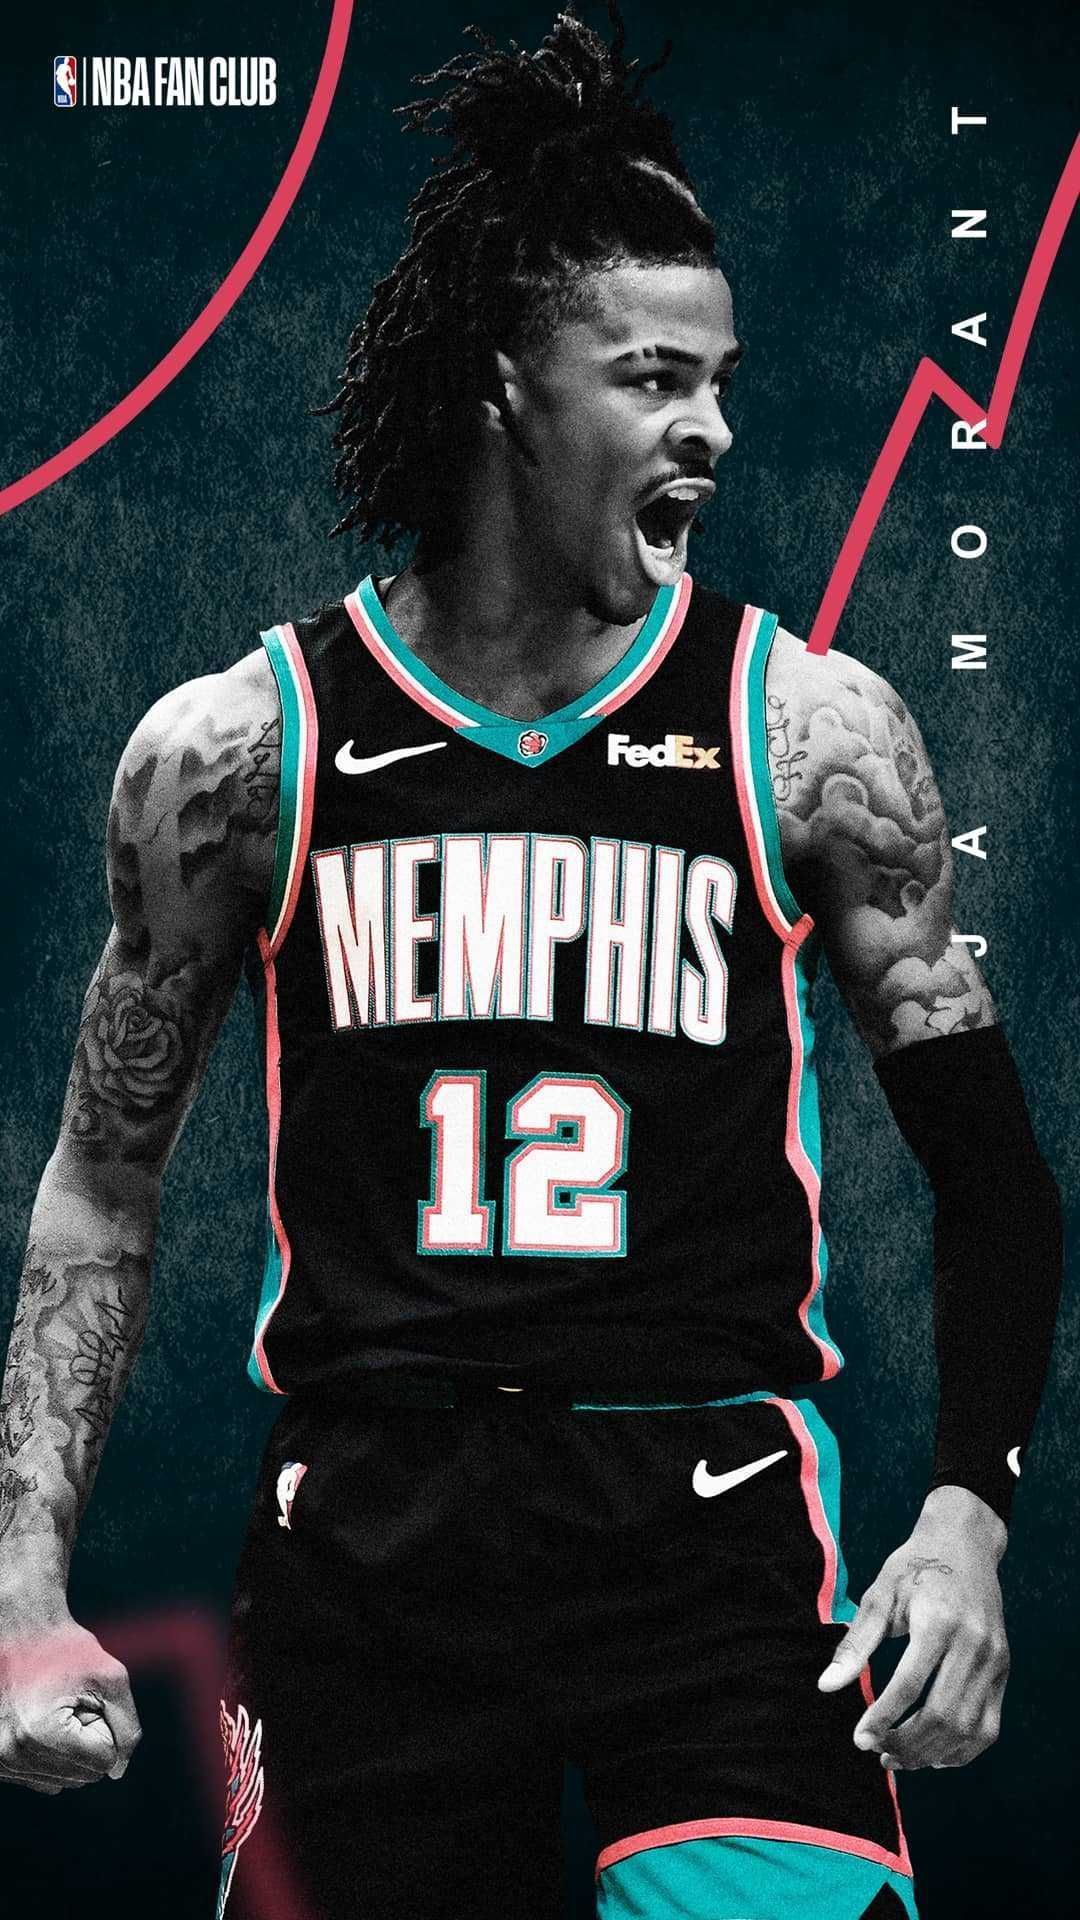 A basketball player with tattoos on his face - Ja Morant